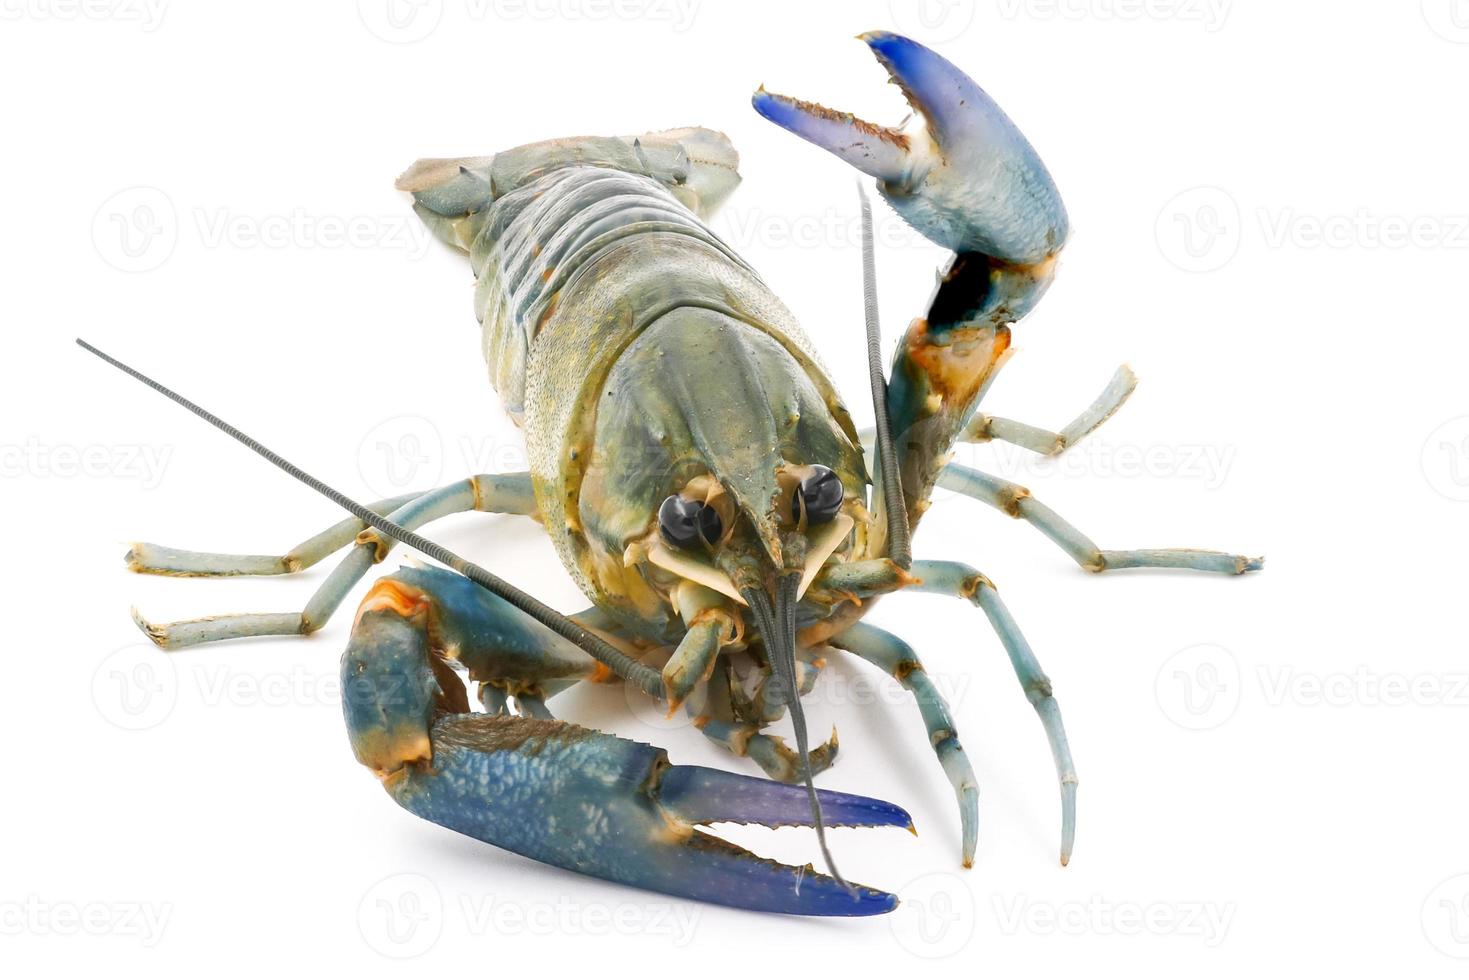 Crayfish or Freshwater lobster on a white background. photo